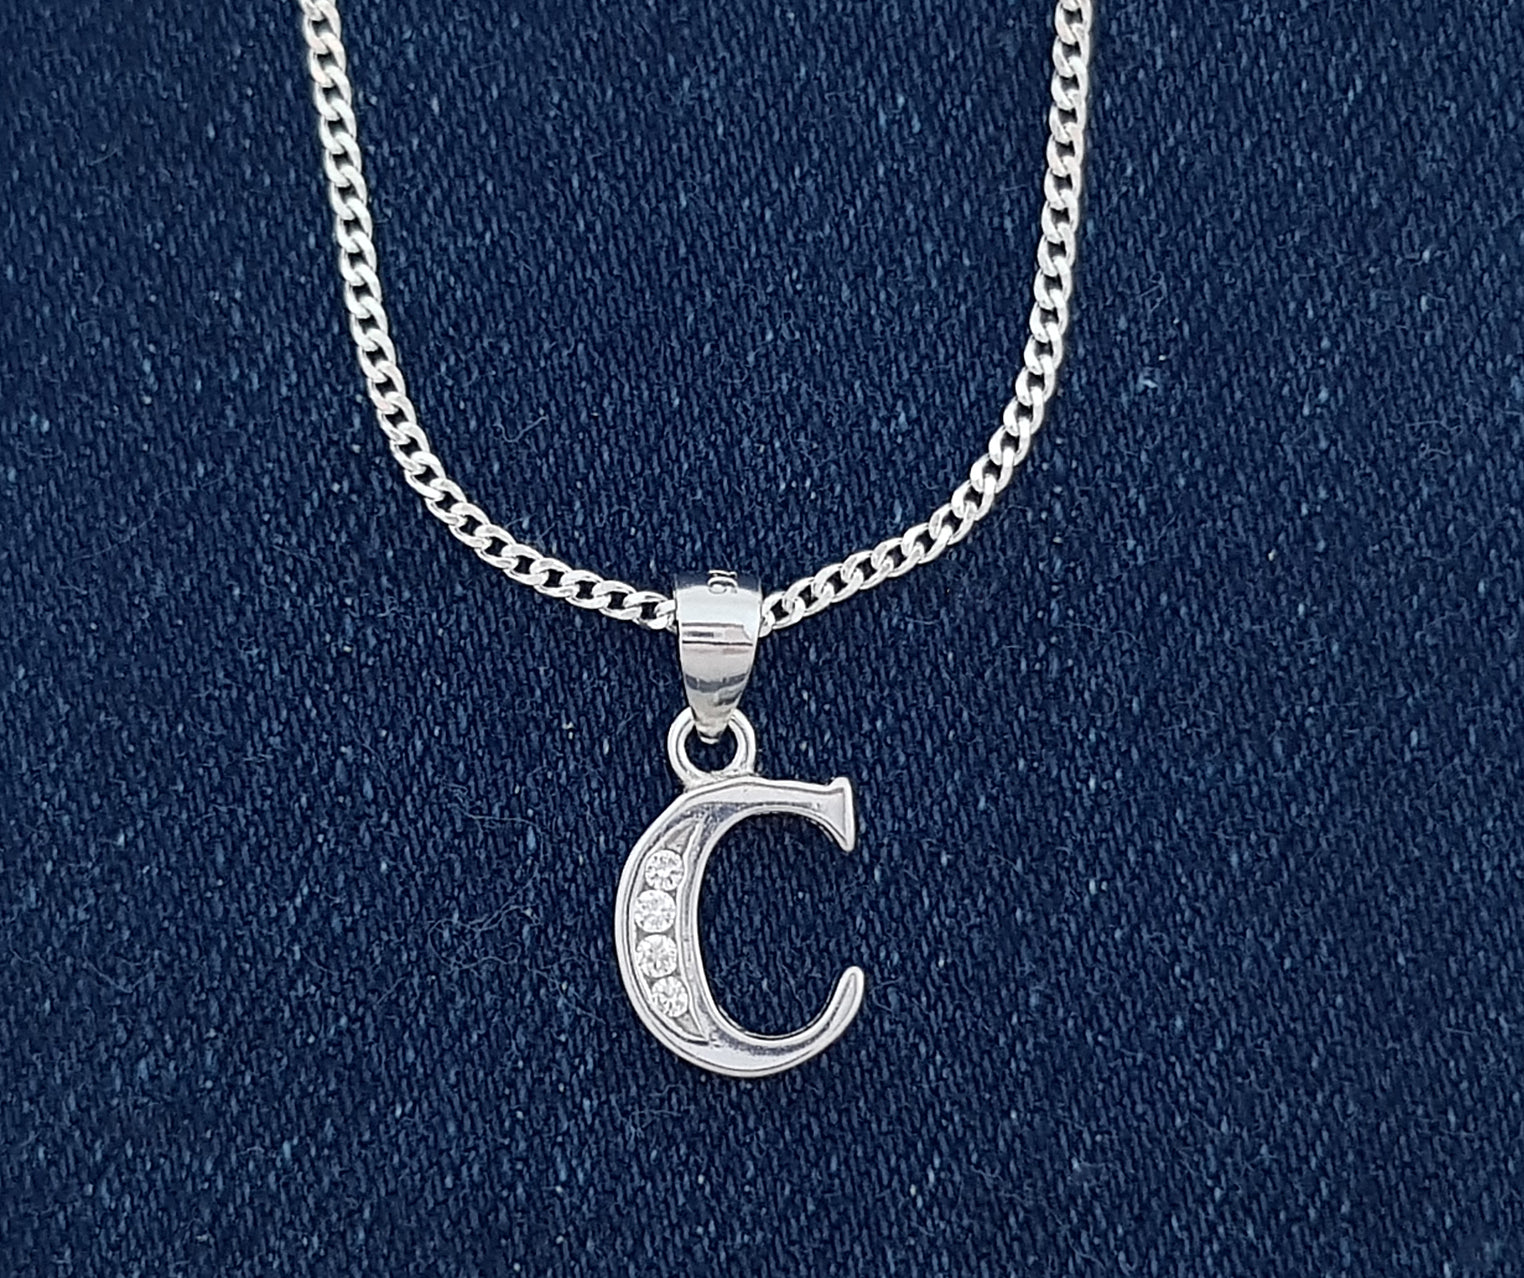 Sterling Silver Initial with Cubic Zirconia Stones- "C" Initial or Letter